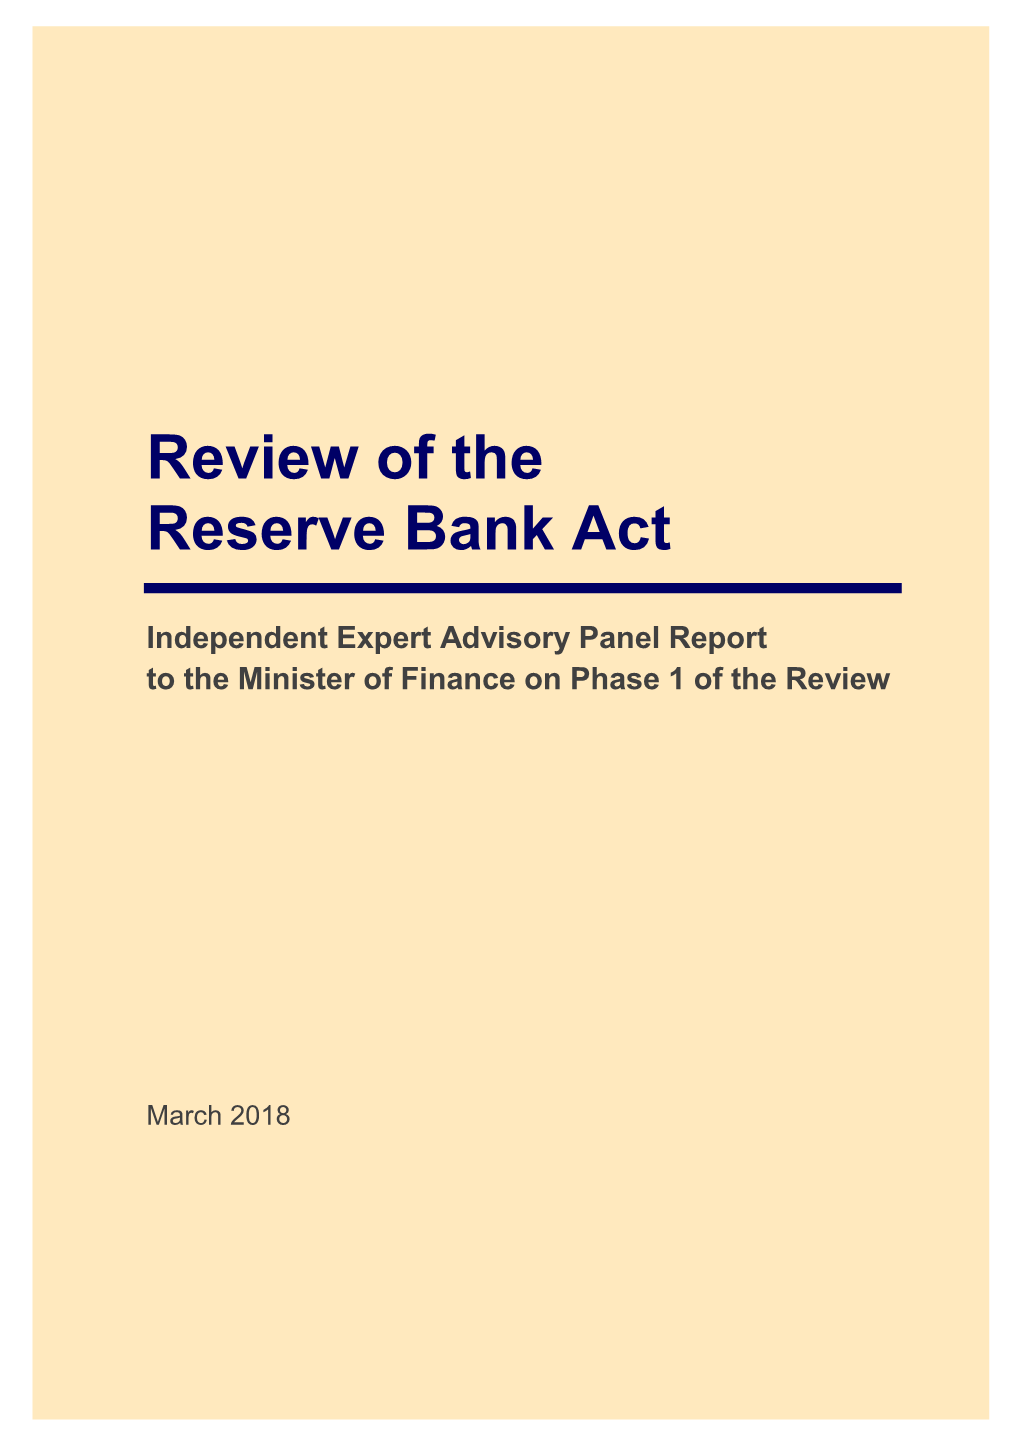 Review of the Reserve Bank Act